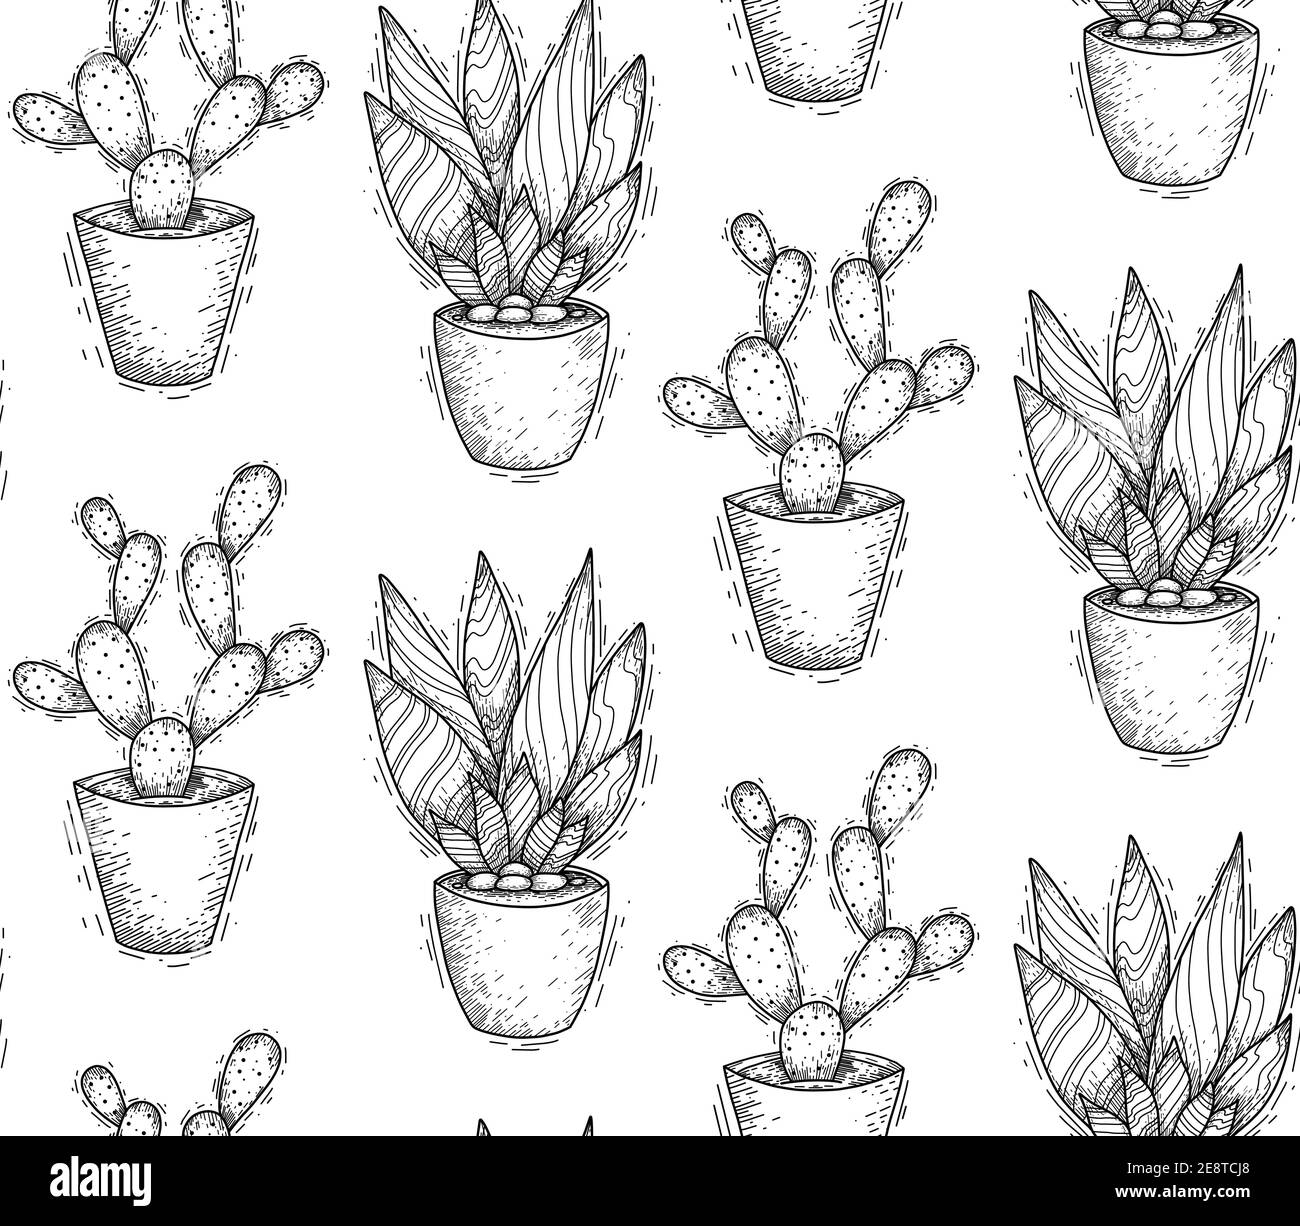 Seamless sketch texture of cactuses in pots with hatching. Fabric with contour homemade flowers. Monochrome wallpaper with various succulents. Hand dr Stock Vector